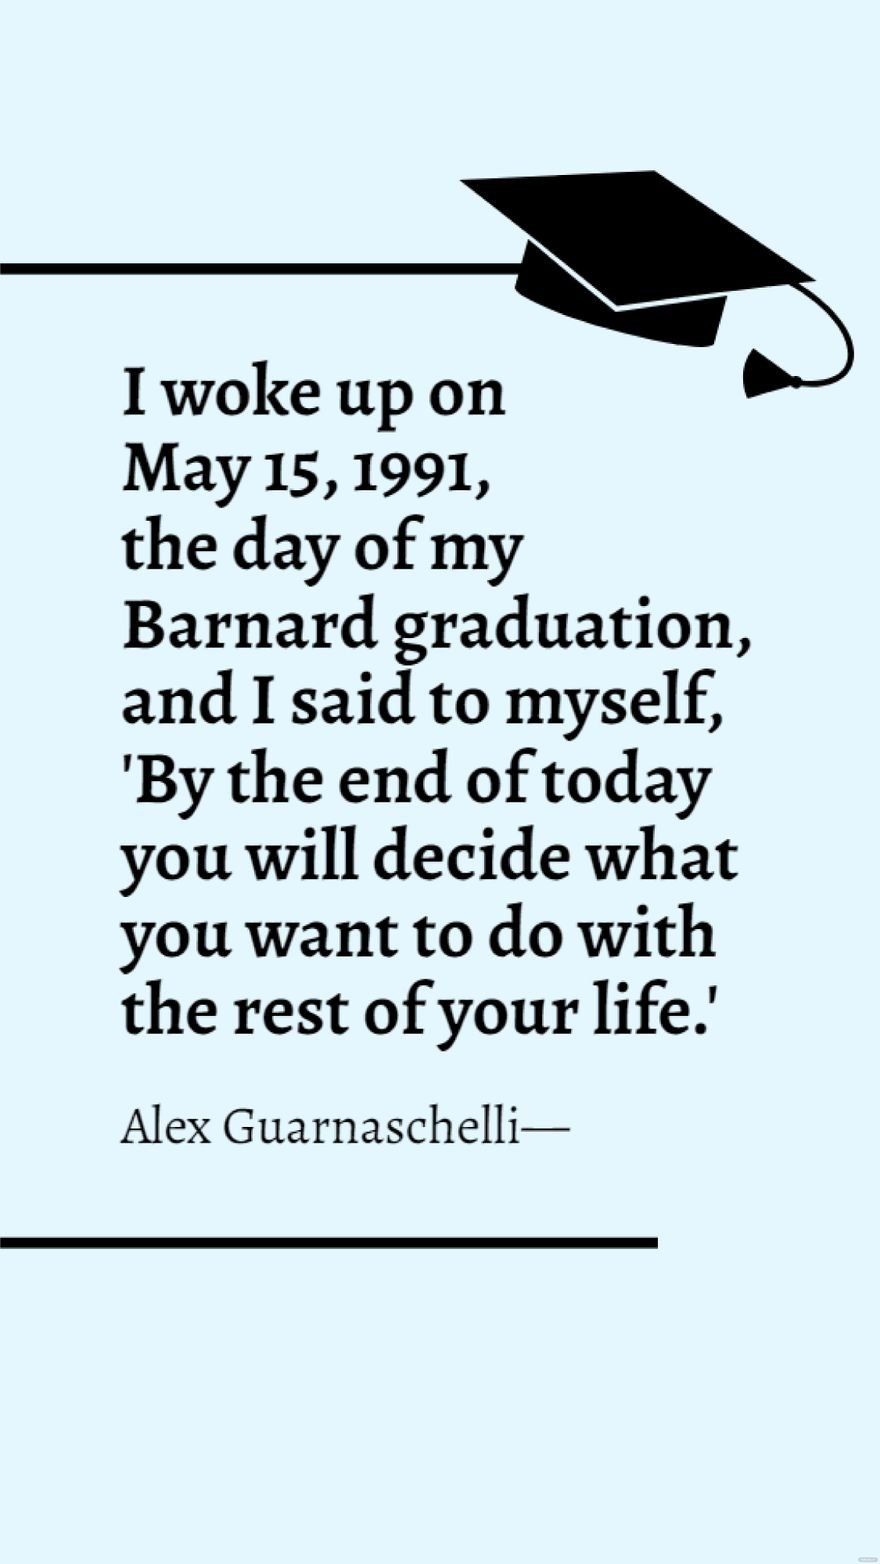 Free Alex Guarnaschelli - I woke up on May 15, 1991, the day of my Barnard graduation, and I said to myself, 'By the end of today you will decide what you want to do with the rest of your life.' in JPG